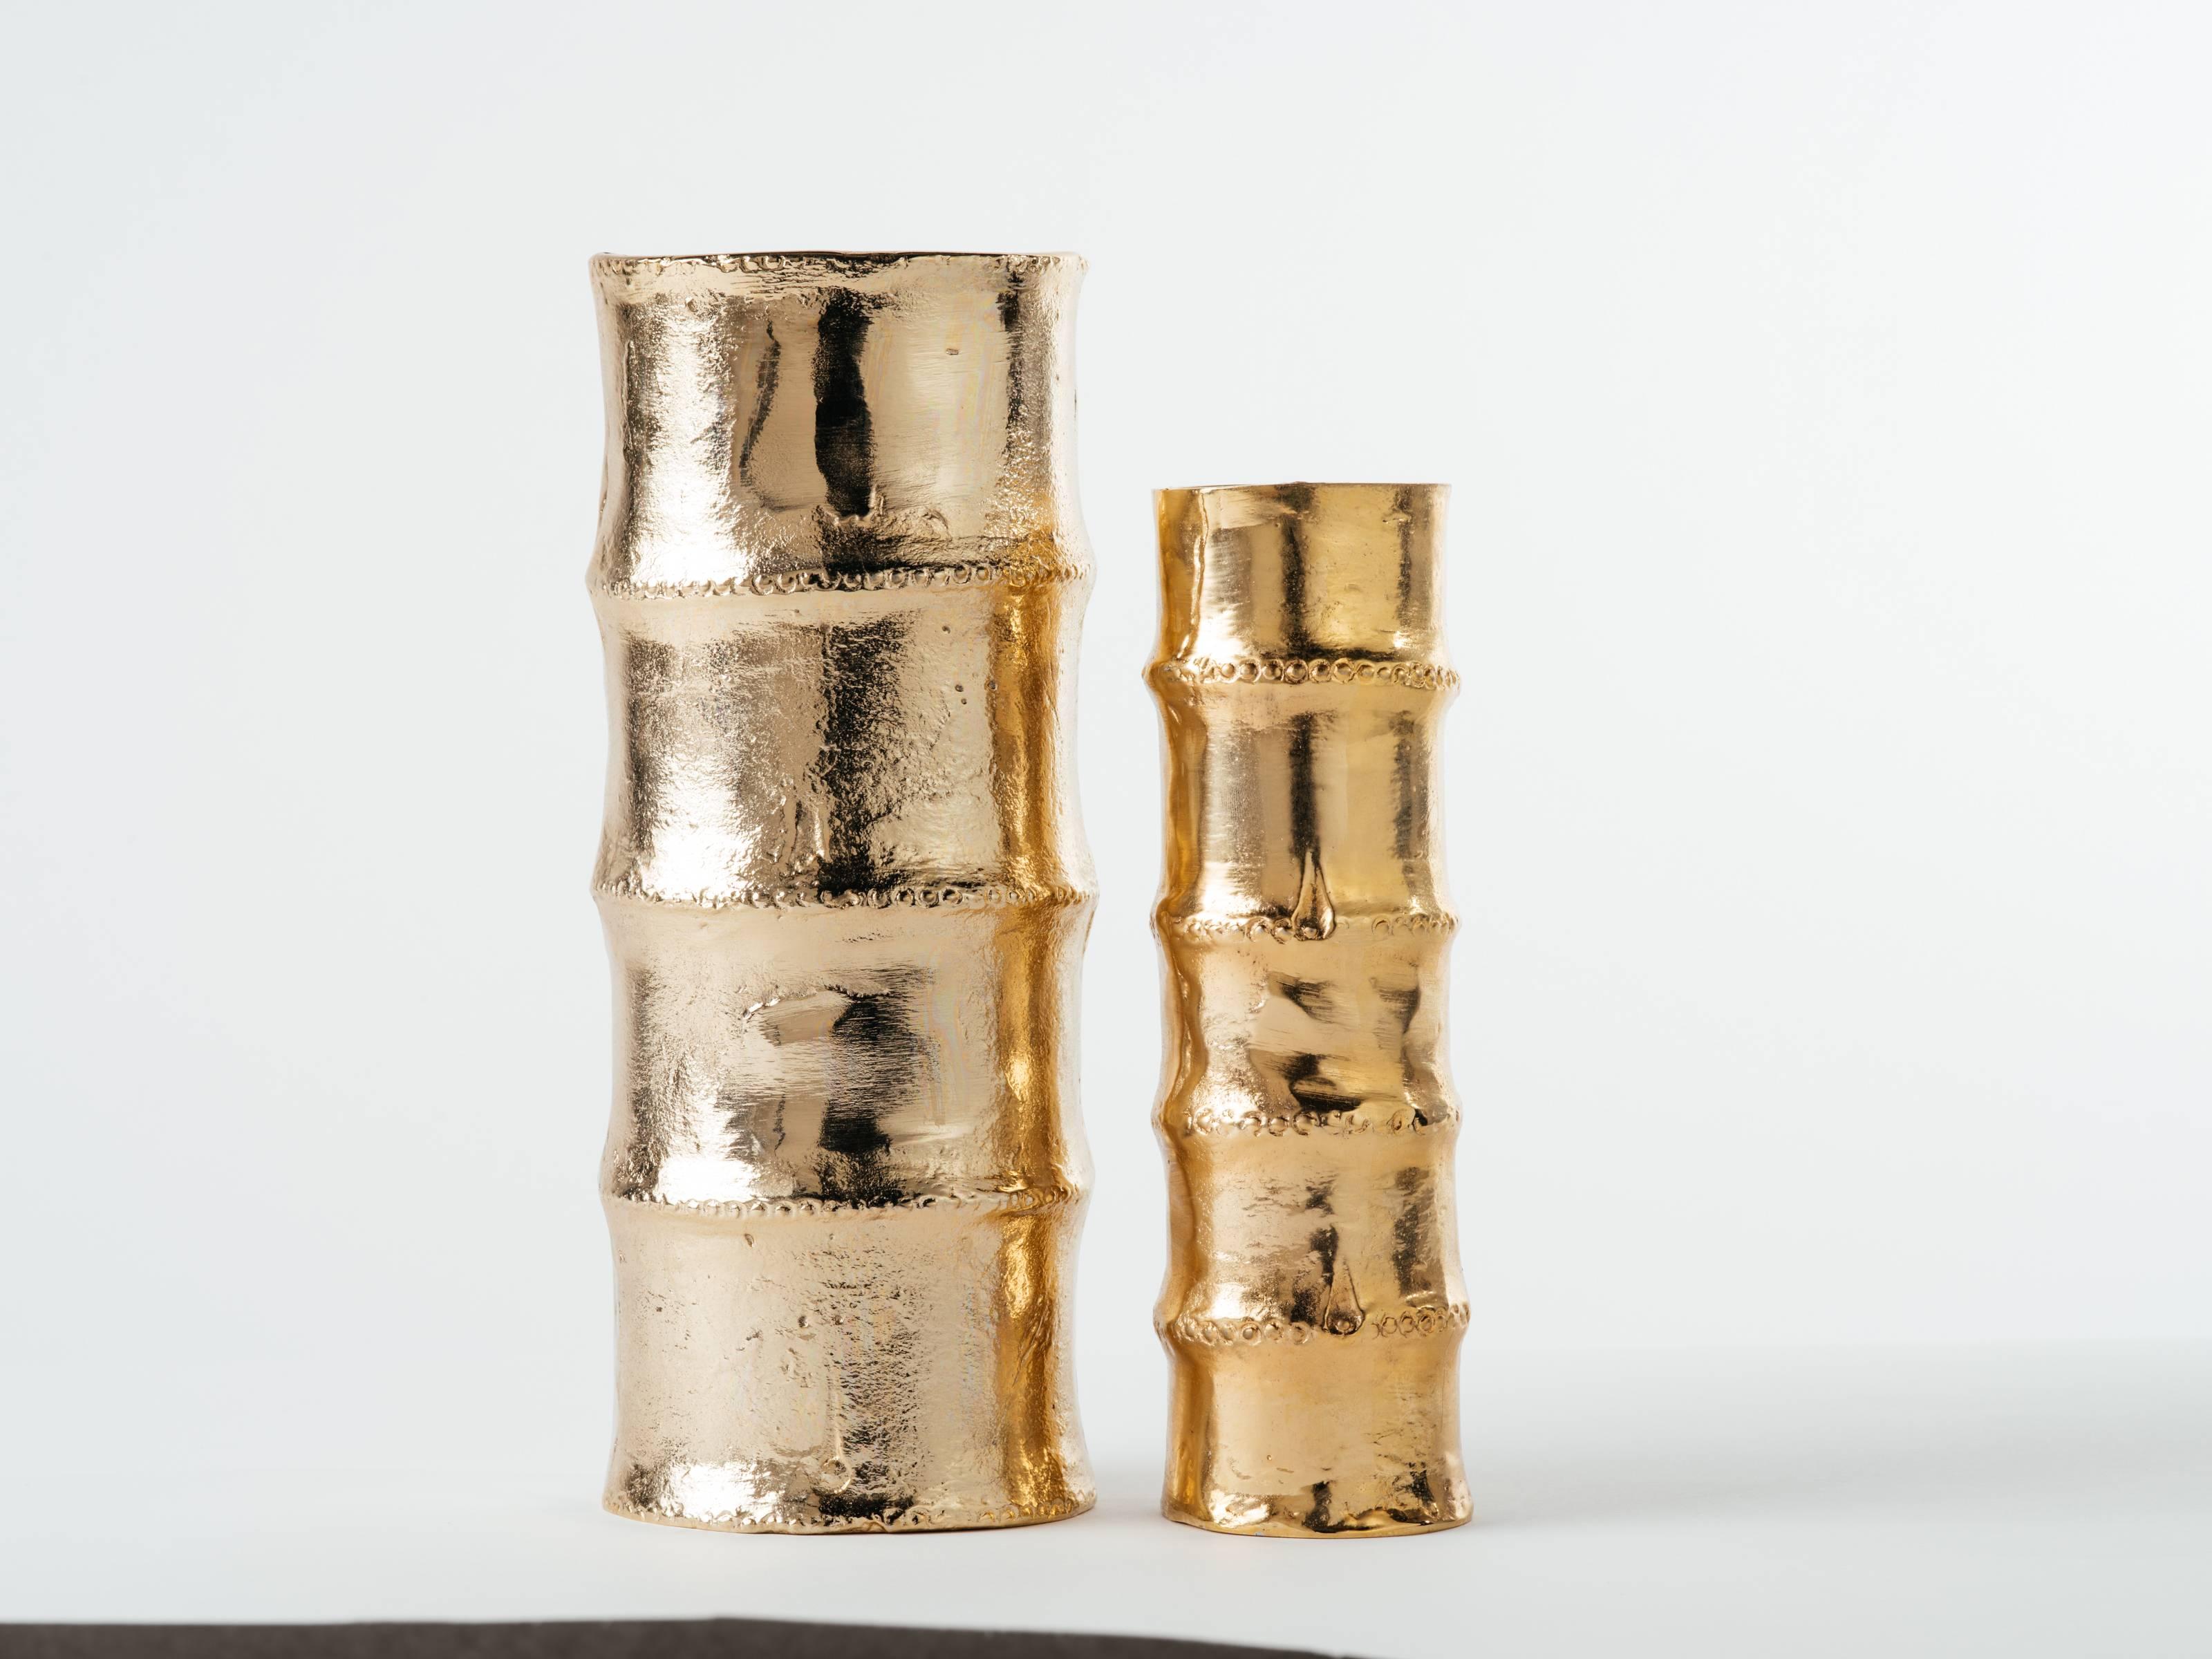 Exquisite pair of Mid-Century Modern style sand cast bamboo vases. Handcrafted 24-karat gold plating over metal alloy, or cast iron. Large vase measures 12